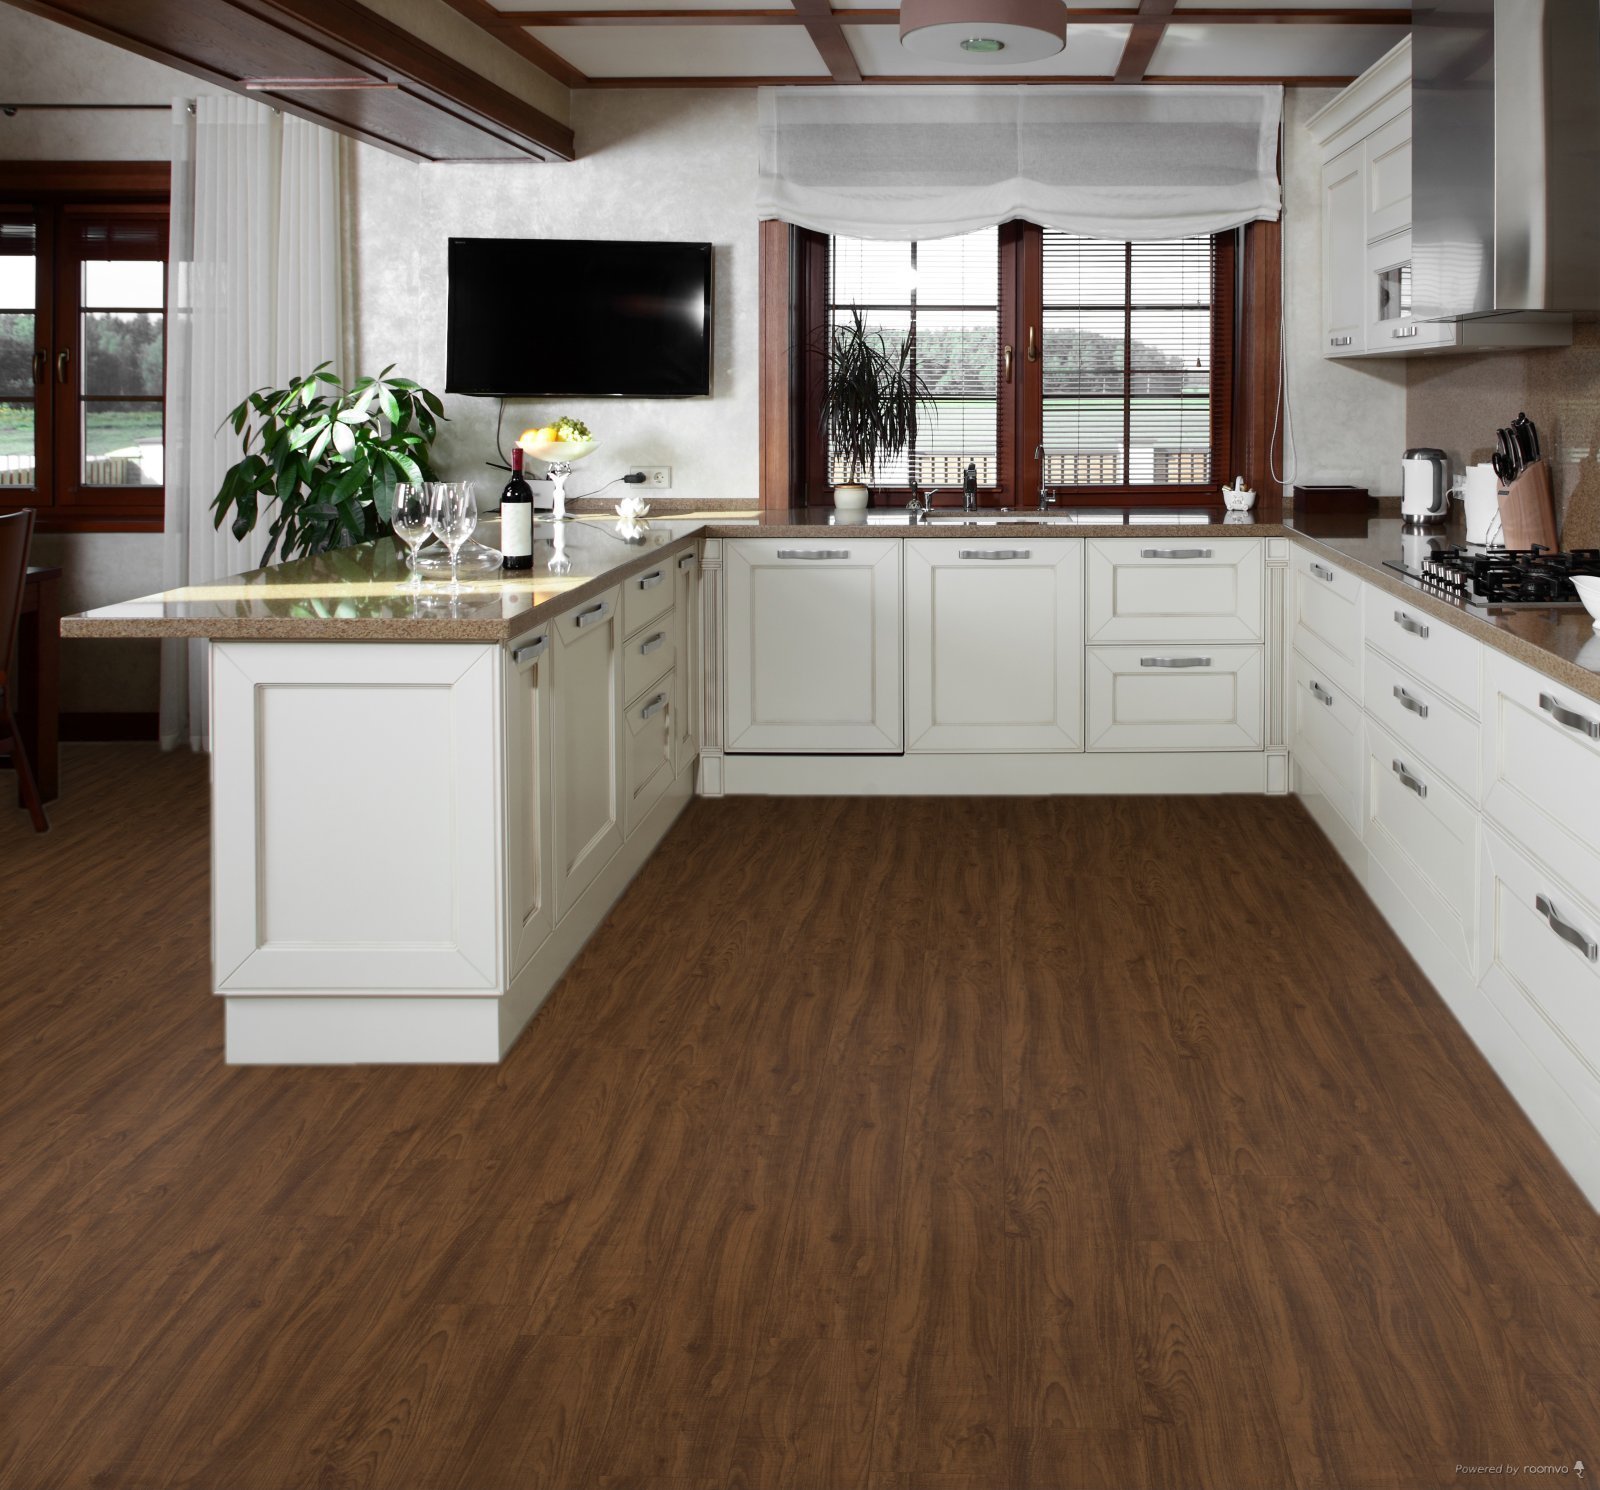 Horizen Flooring presents to you a picture of a quality wide plank Gunstock luxury vinyl plank. NovoCore Premium collection features a wide range of colors & designs that will compliment any interior. Natural wood grain synchronized surface allow for an authentic hardwood look & feel. This collection features a 0.25″ / 6.5 mm overall thickness and a durable 22 mil / 0.55 mm wear layer for residential and commercial applications.